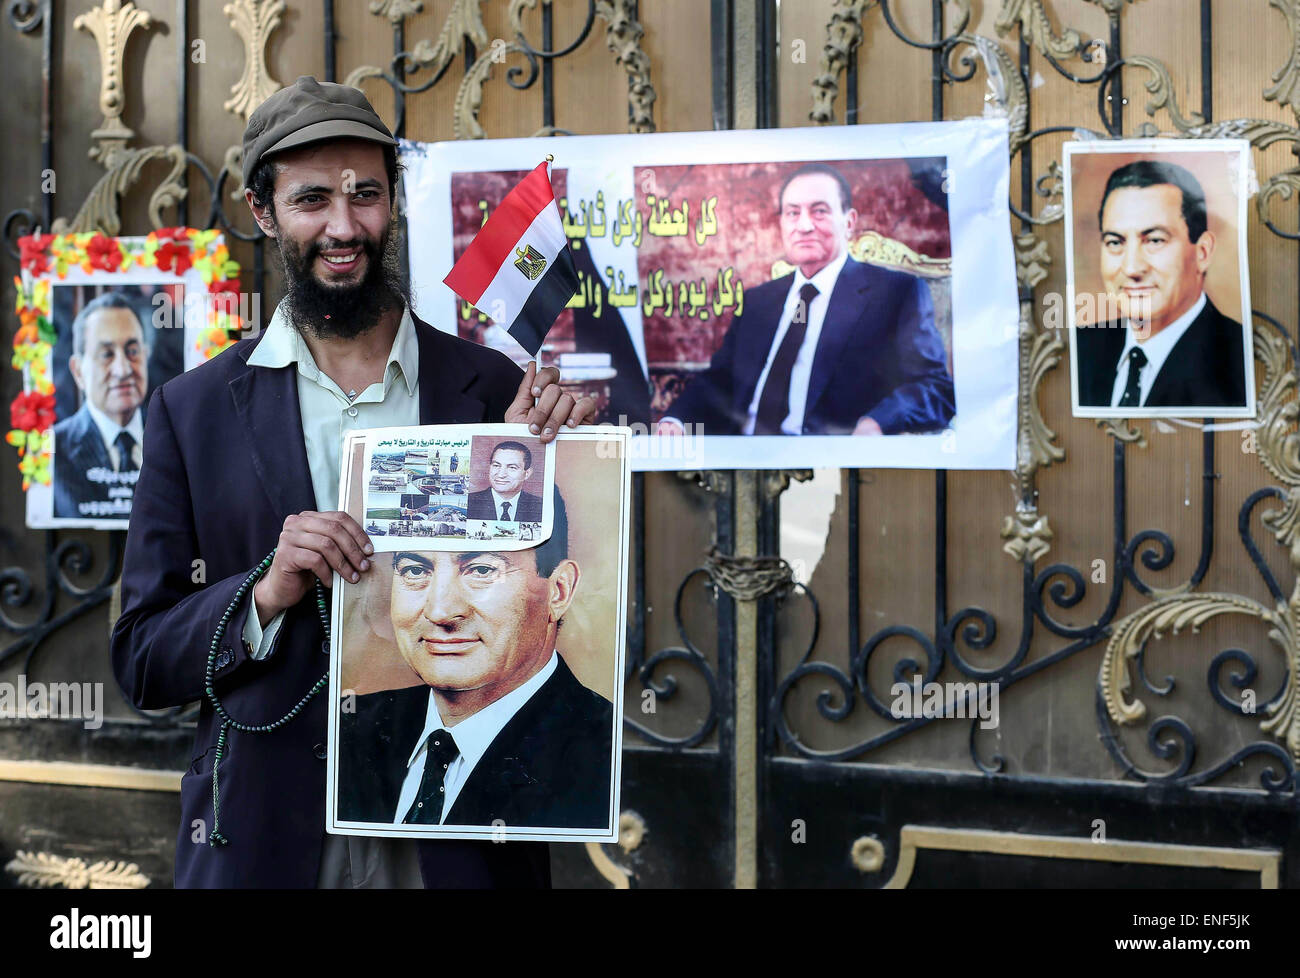 Cairo, Egypt. 4th May, 2015. An Egyptian supporter of former President Hosni Mubarak holds his picture during a celebration to mark his 87th birthday, outside Maadi military hospital, near Cairo on May 4, 2015. An Egyptian legal authority on Monday ruled in favor of former President Hosni Mubarak by allowing him to retain his ''privileges'' as former president, a judicial source has said © Amr Sayed/APA Images/ZUMA Wire/Alamy Live News Stock Photo